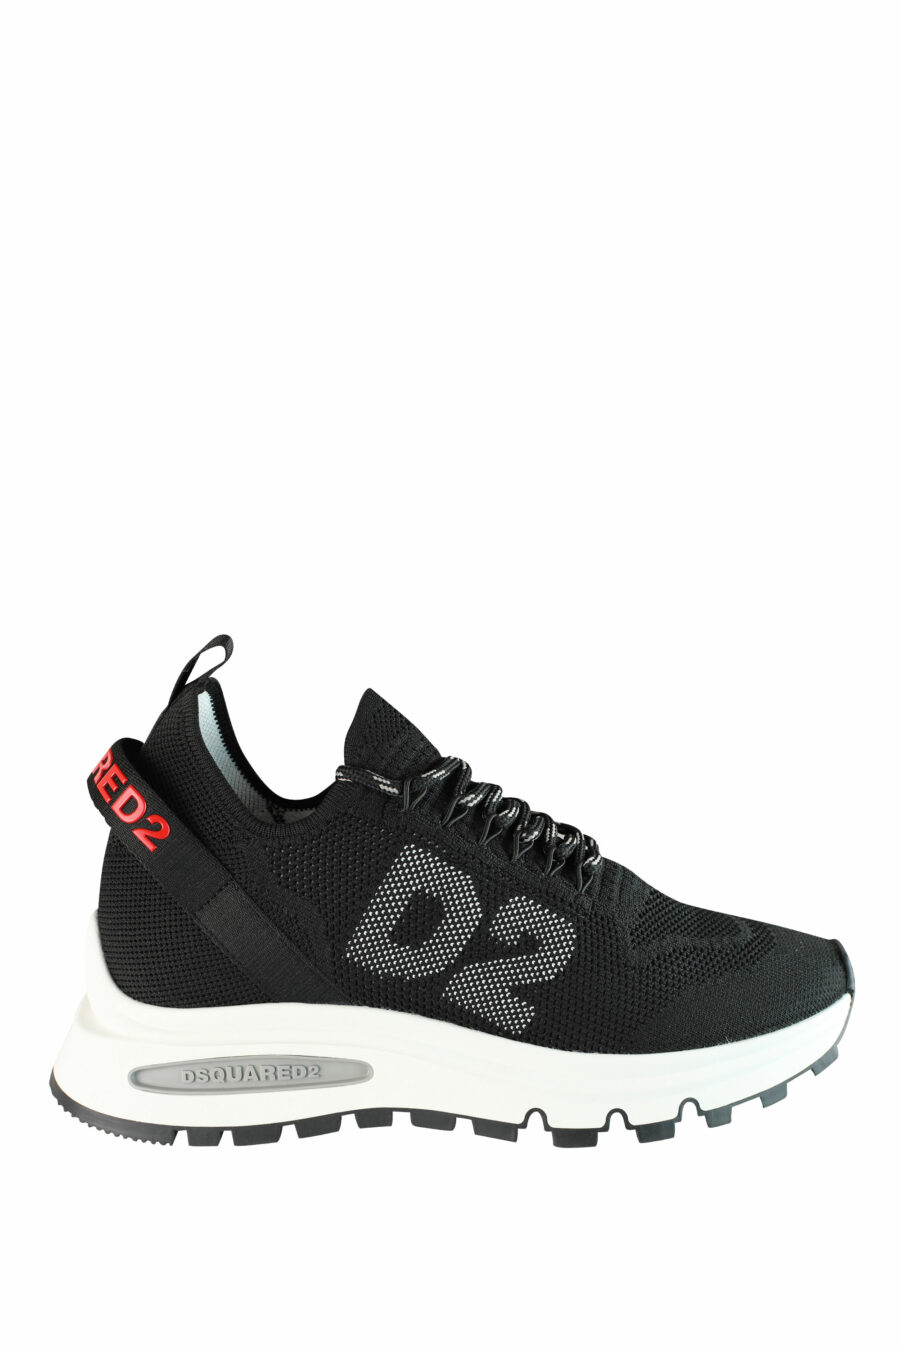 Black "Run D2" trainers with red logo - IMG 1414